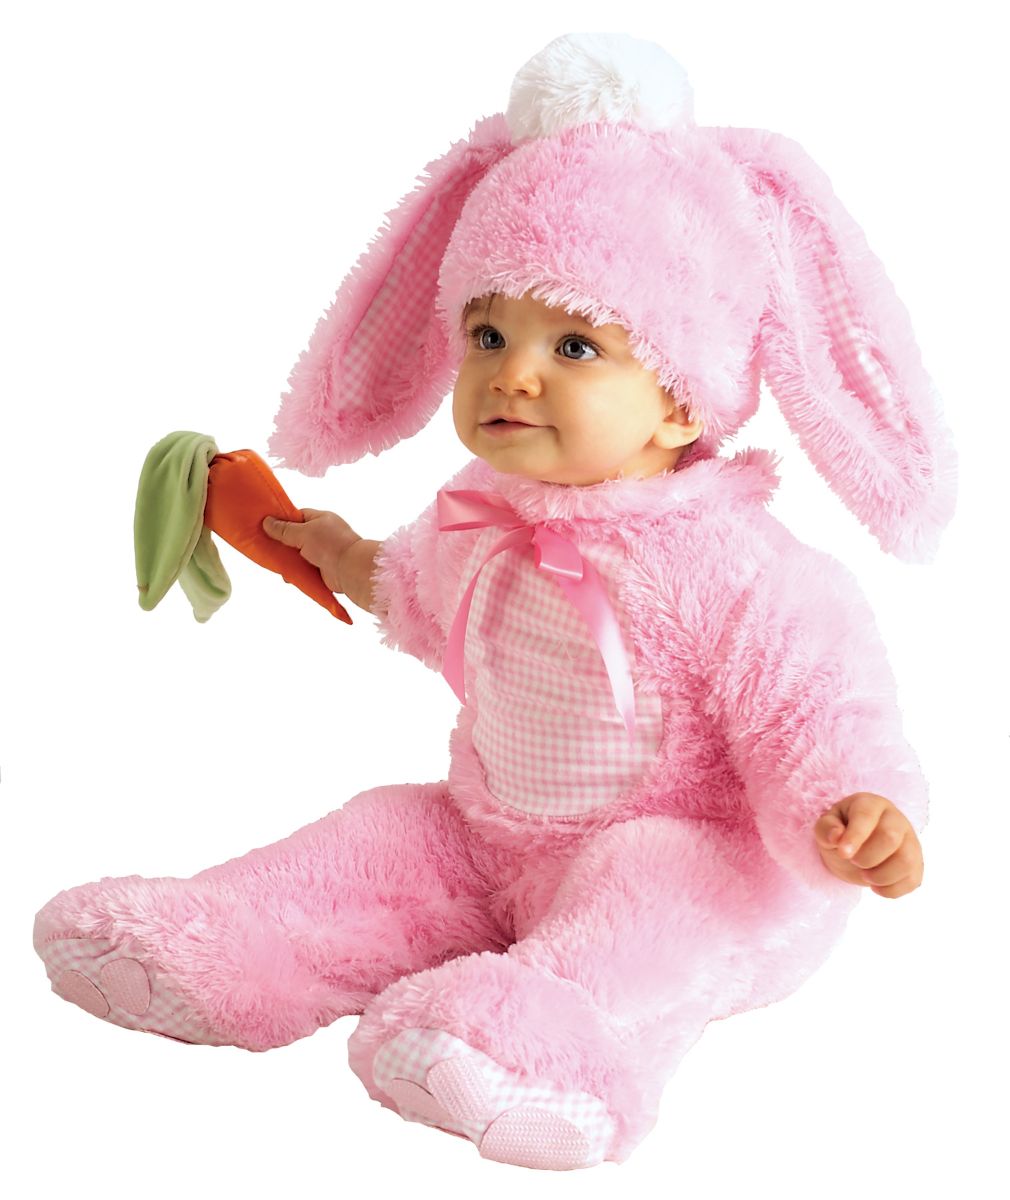 The Costume Center White and Pink Precious Wabbit Unisex Infant Halloween Costume